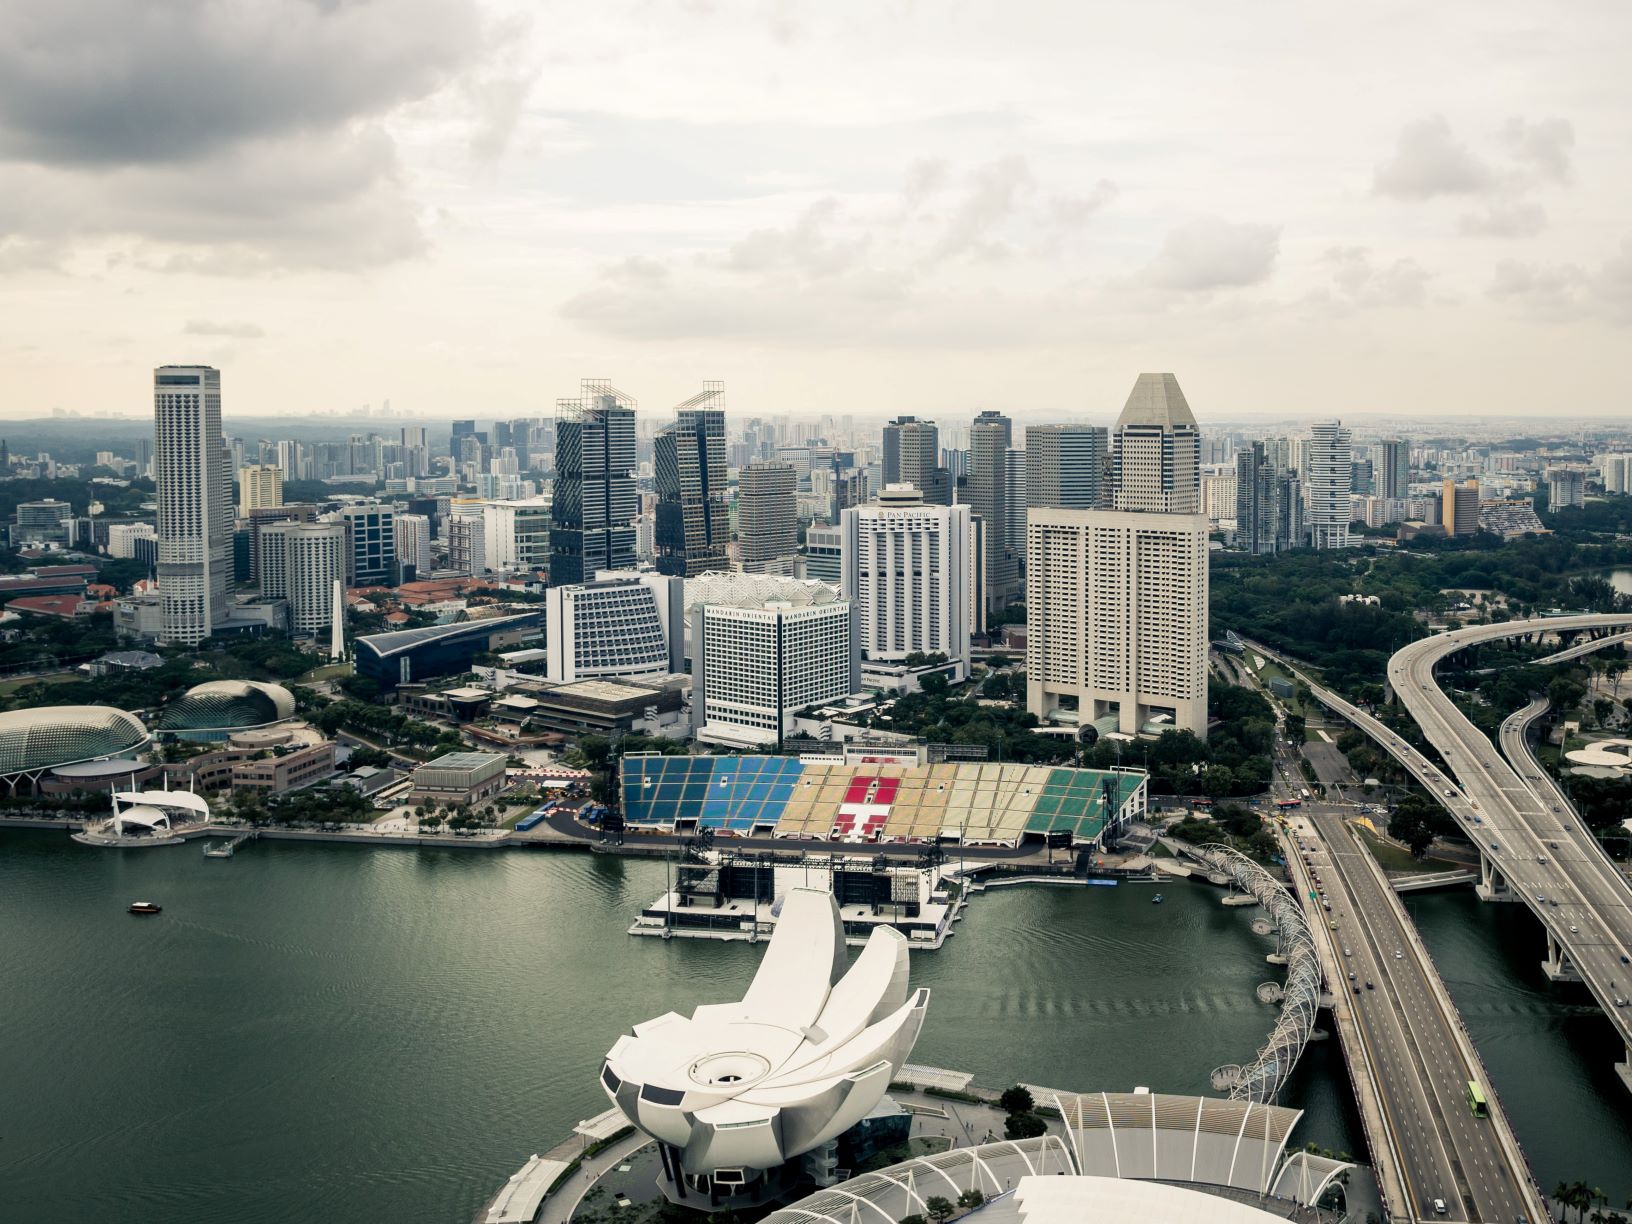 Aerial view of the floating platform in Singapore